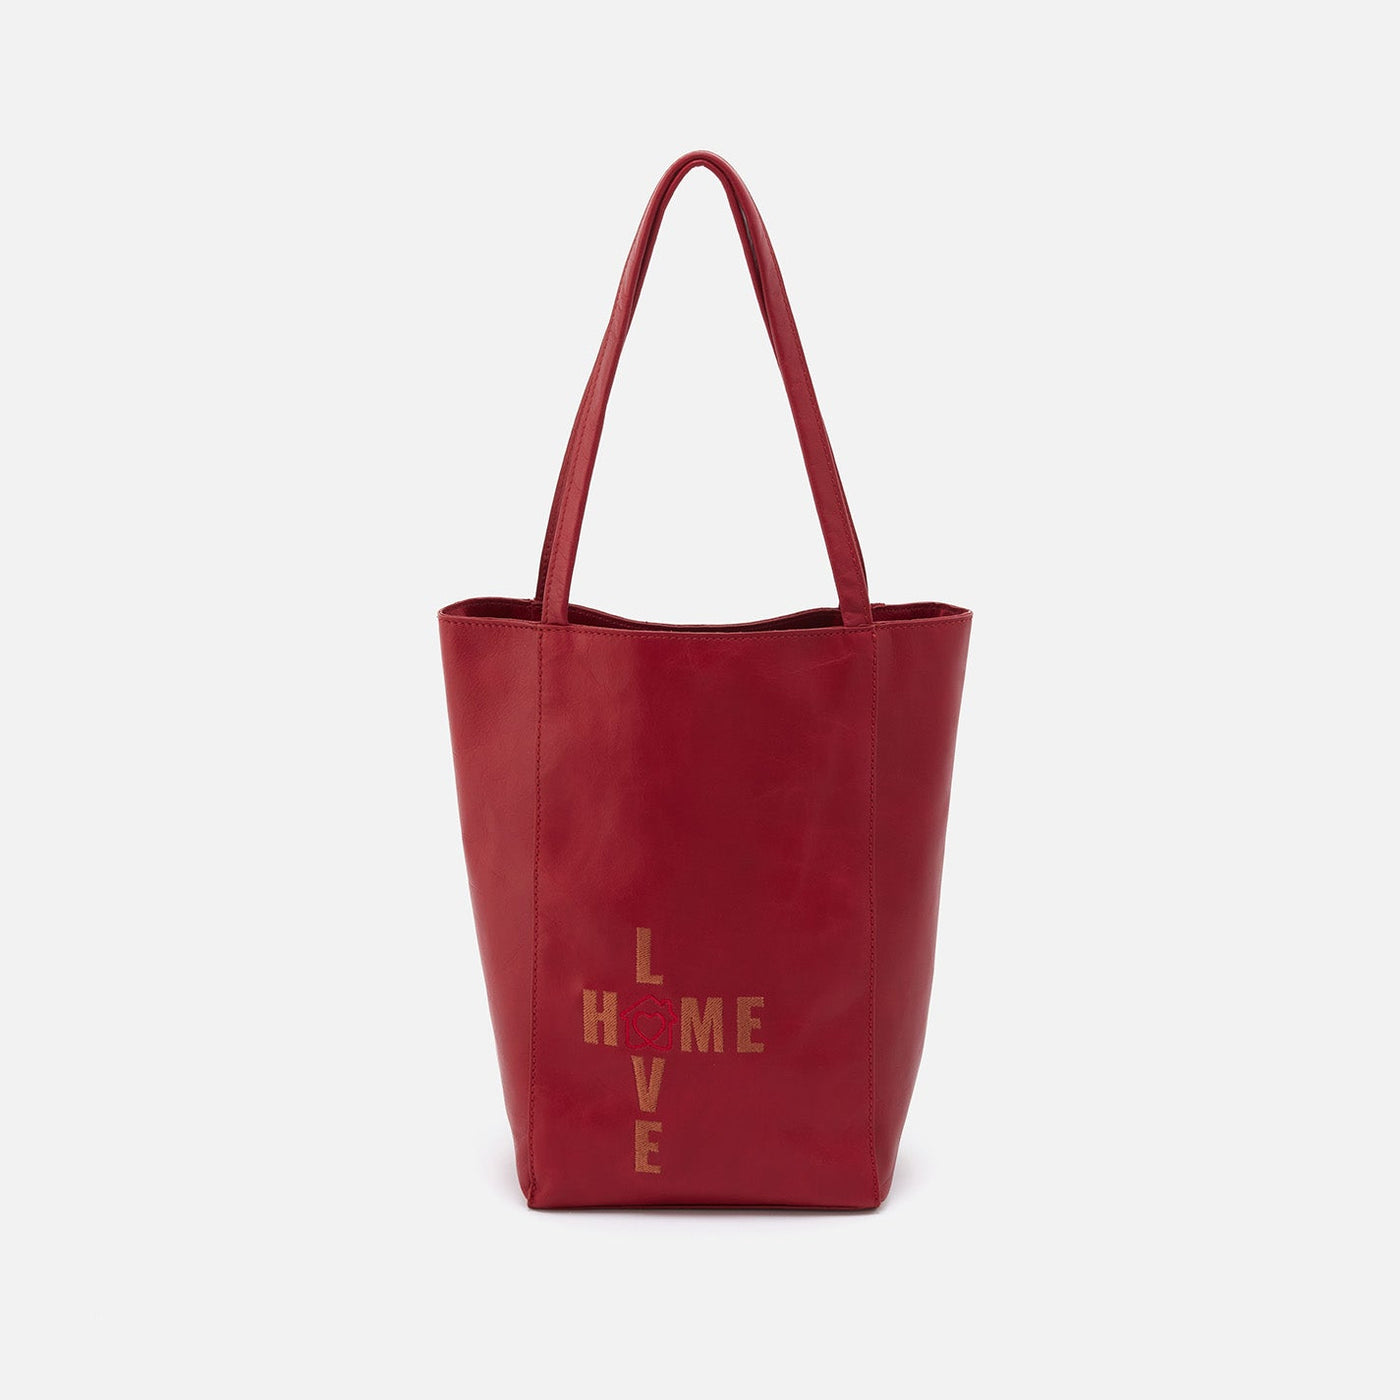 The Giving Tote in Matte Leather - Garnet